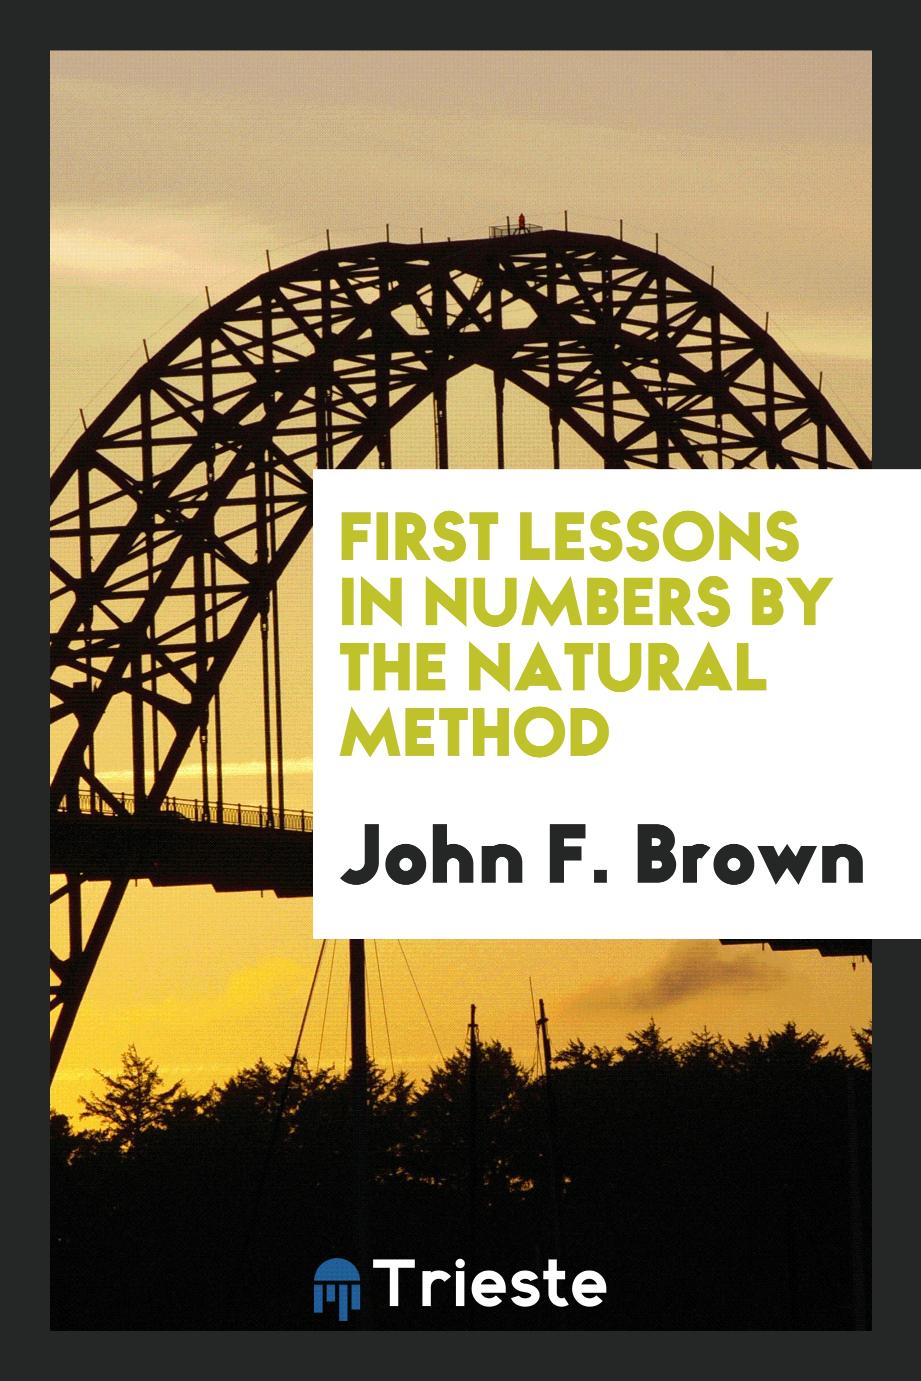 First lessons in numbers by the natural method